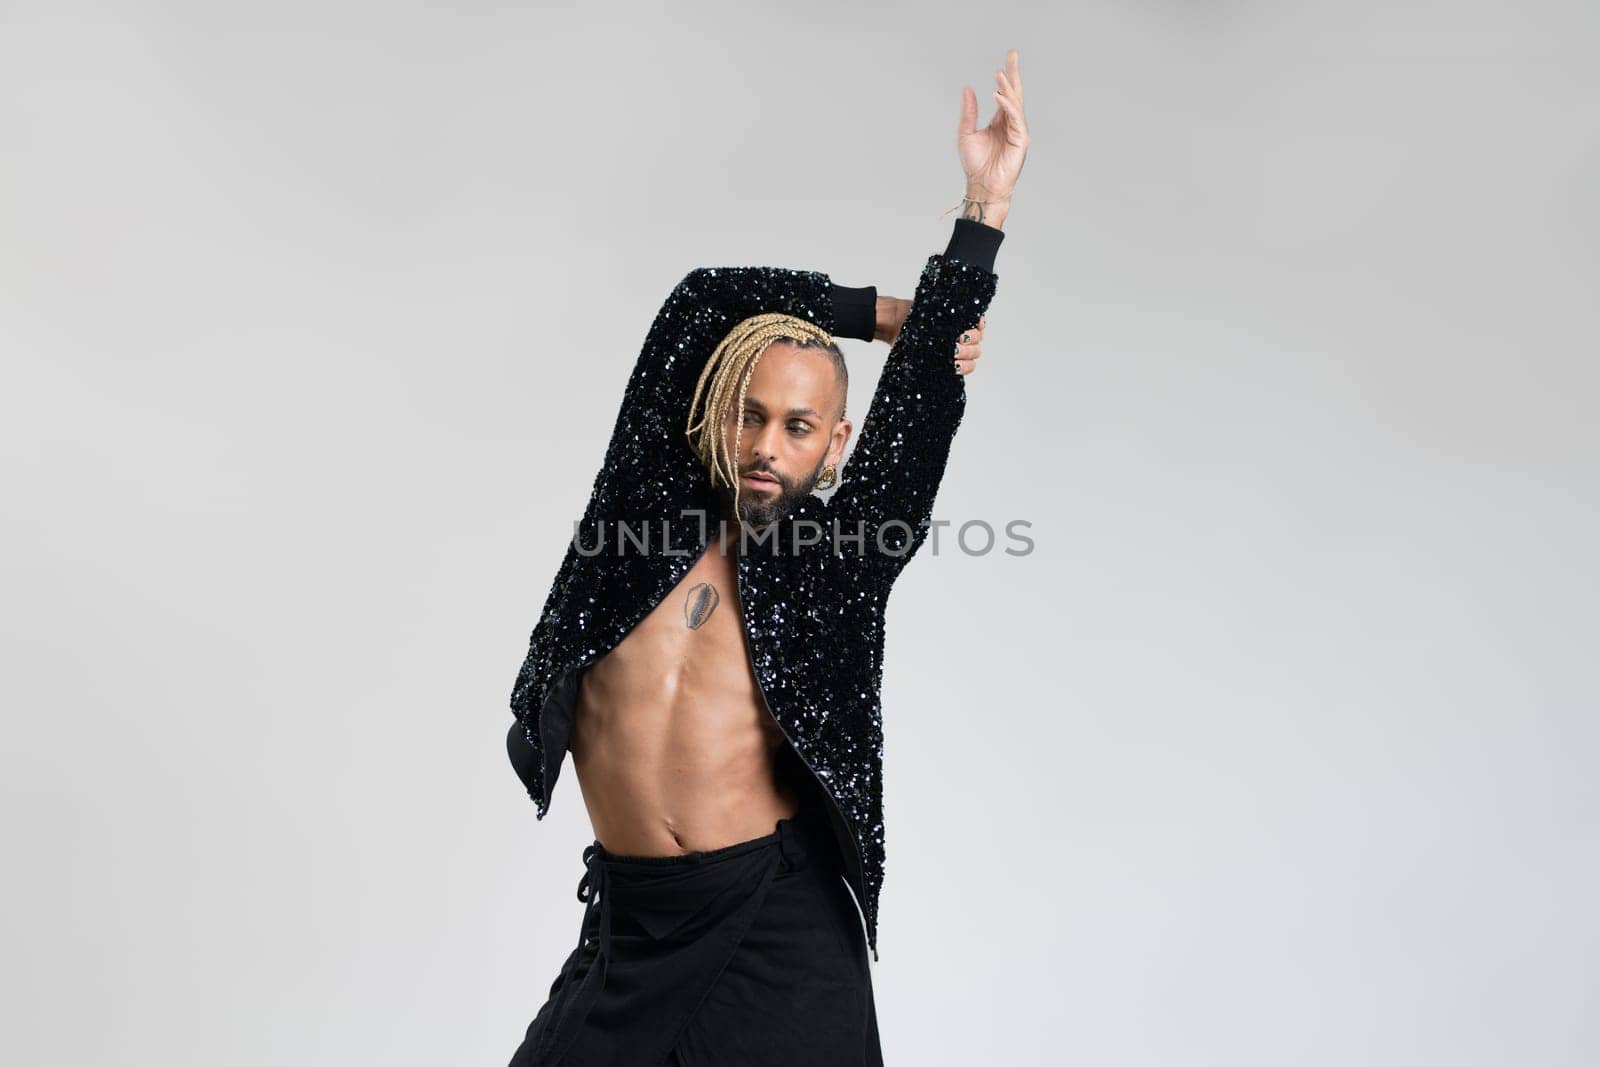 Man wearing women clothing dancing. Afro-american homosexual male wearing black skirt and jacket with sequins posing in photo studio on white background. Bearded gay with make up